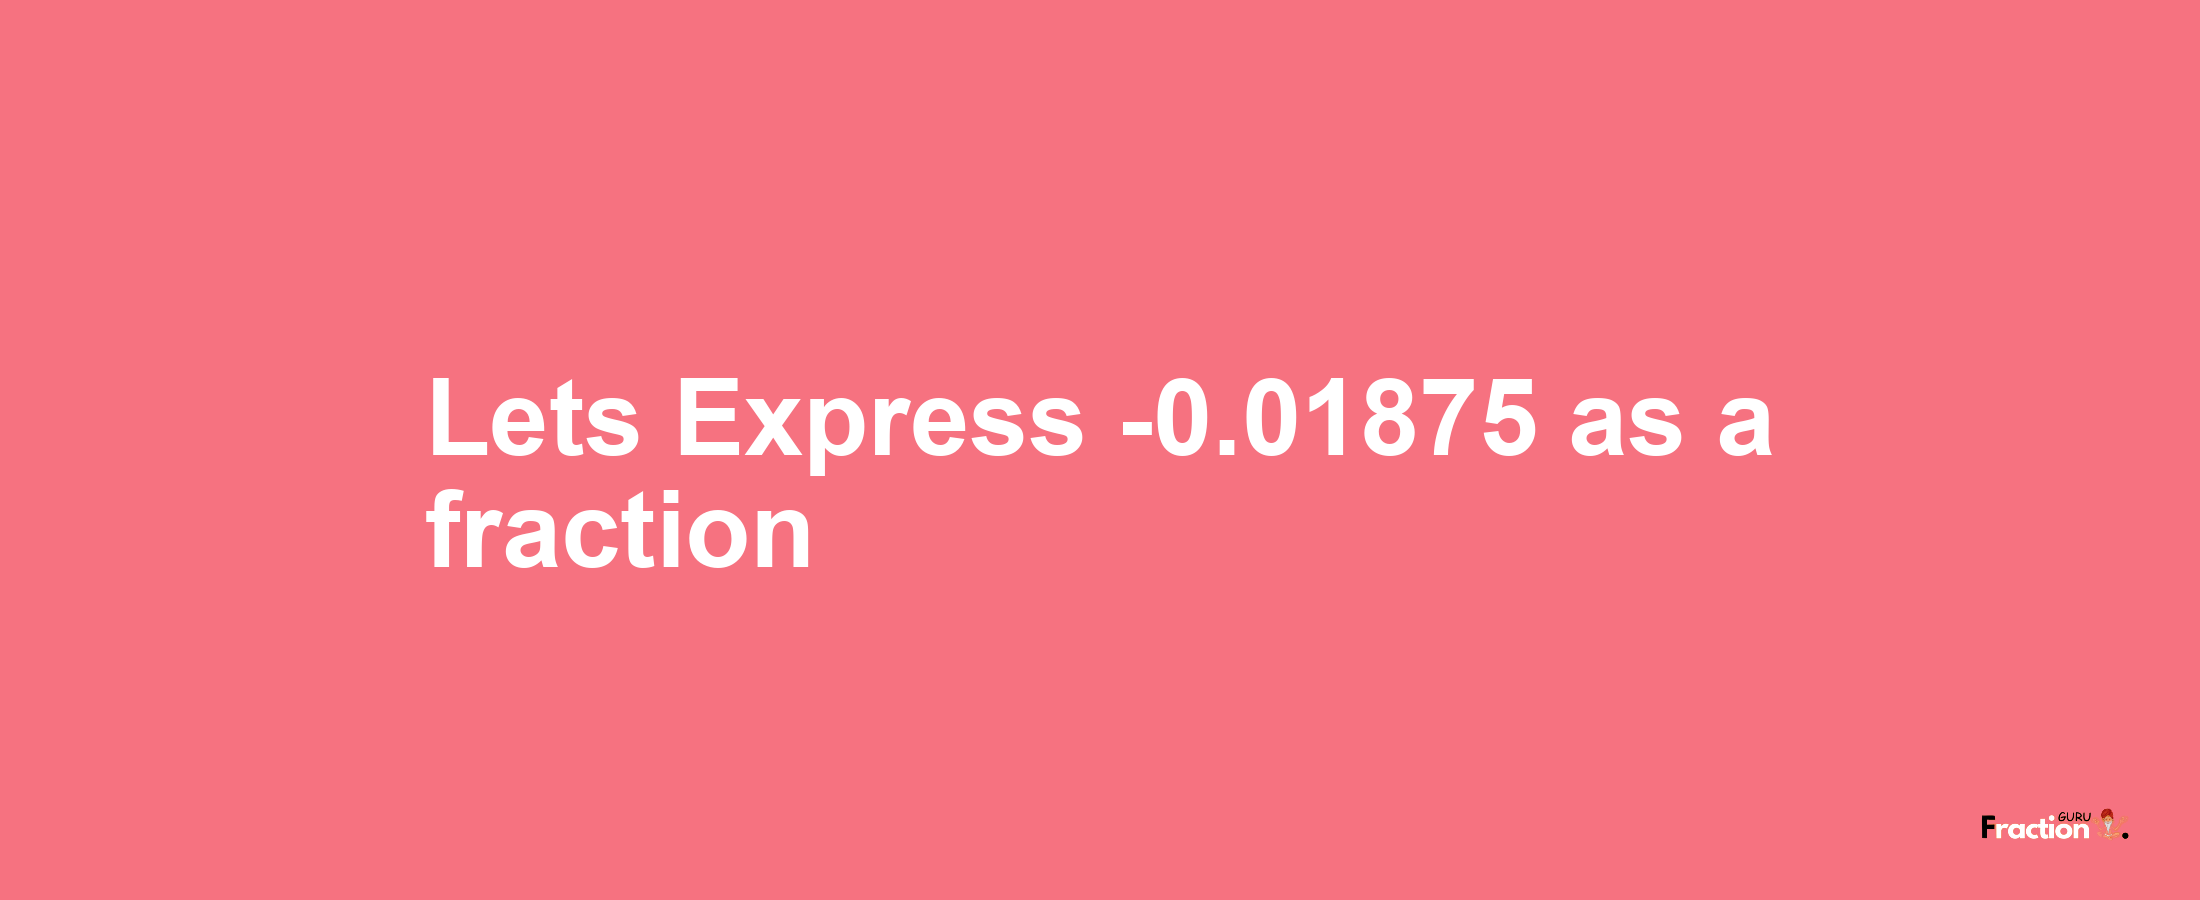 Lets Express -0.01875 as afraction